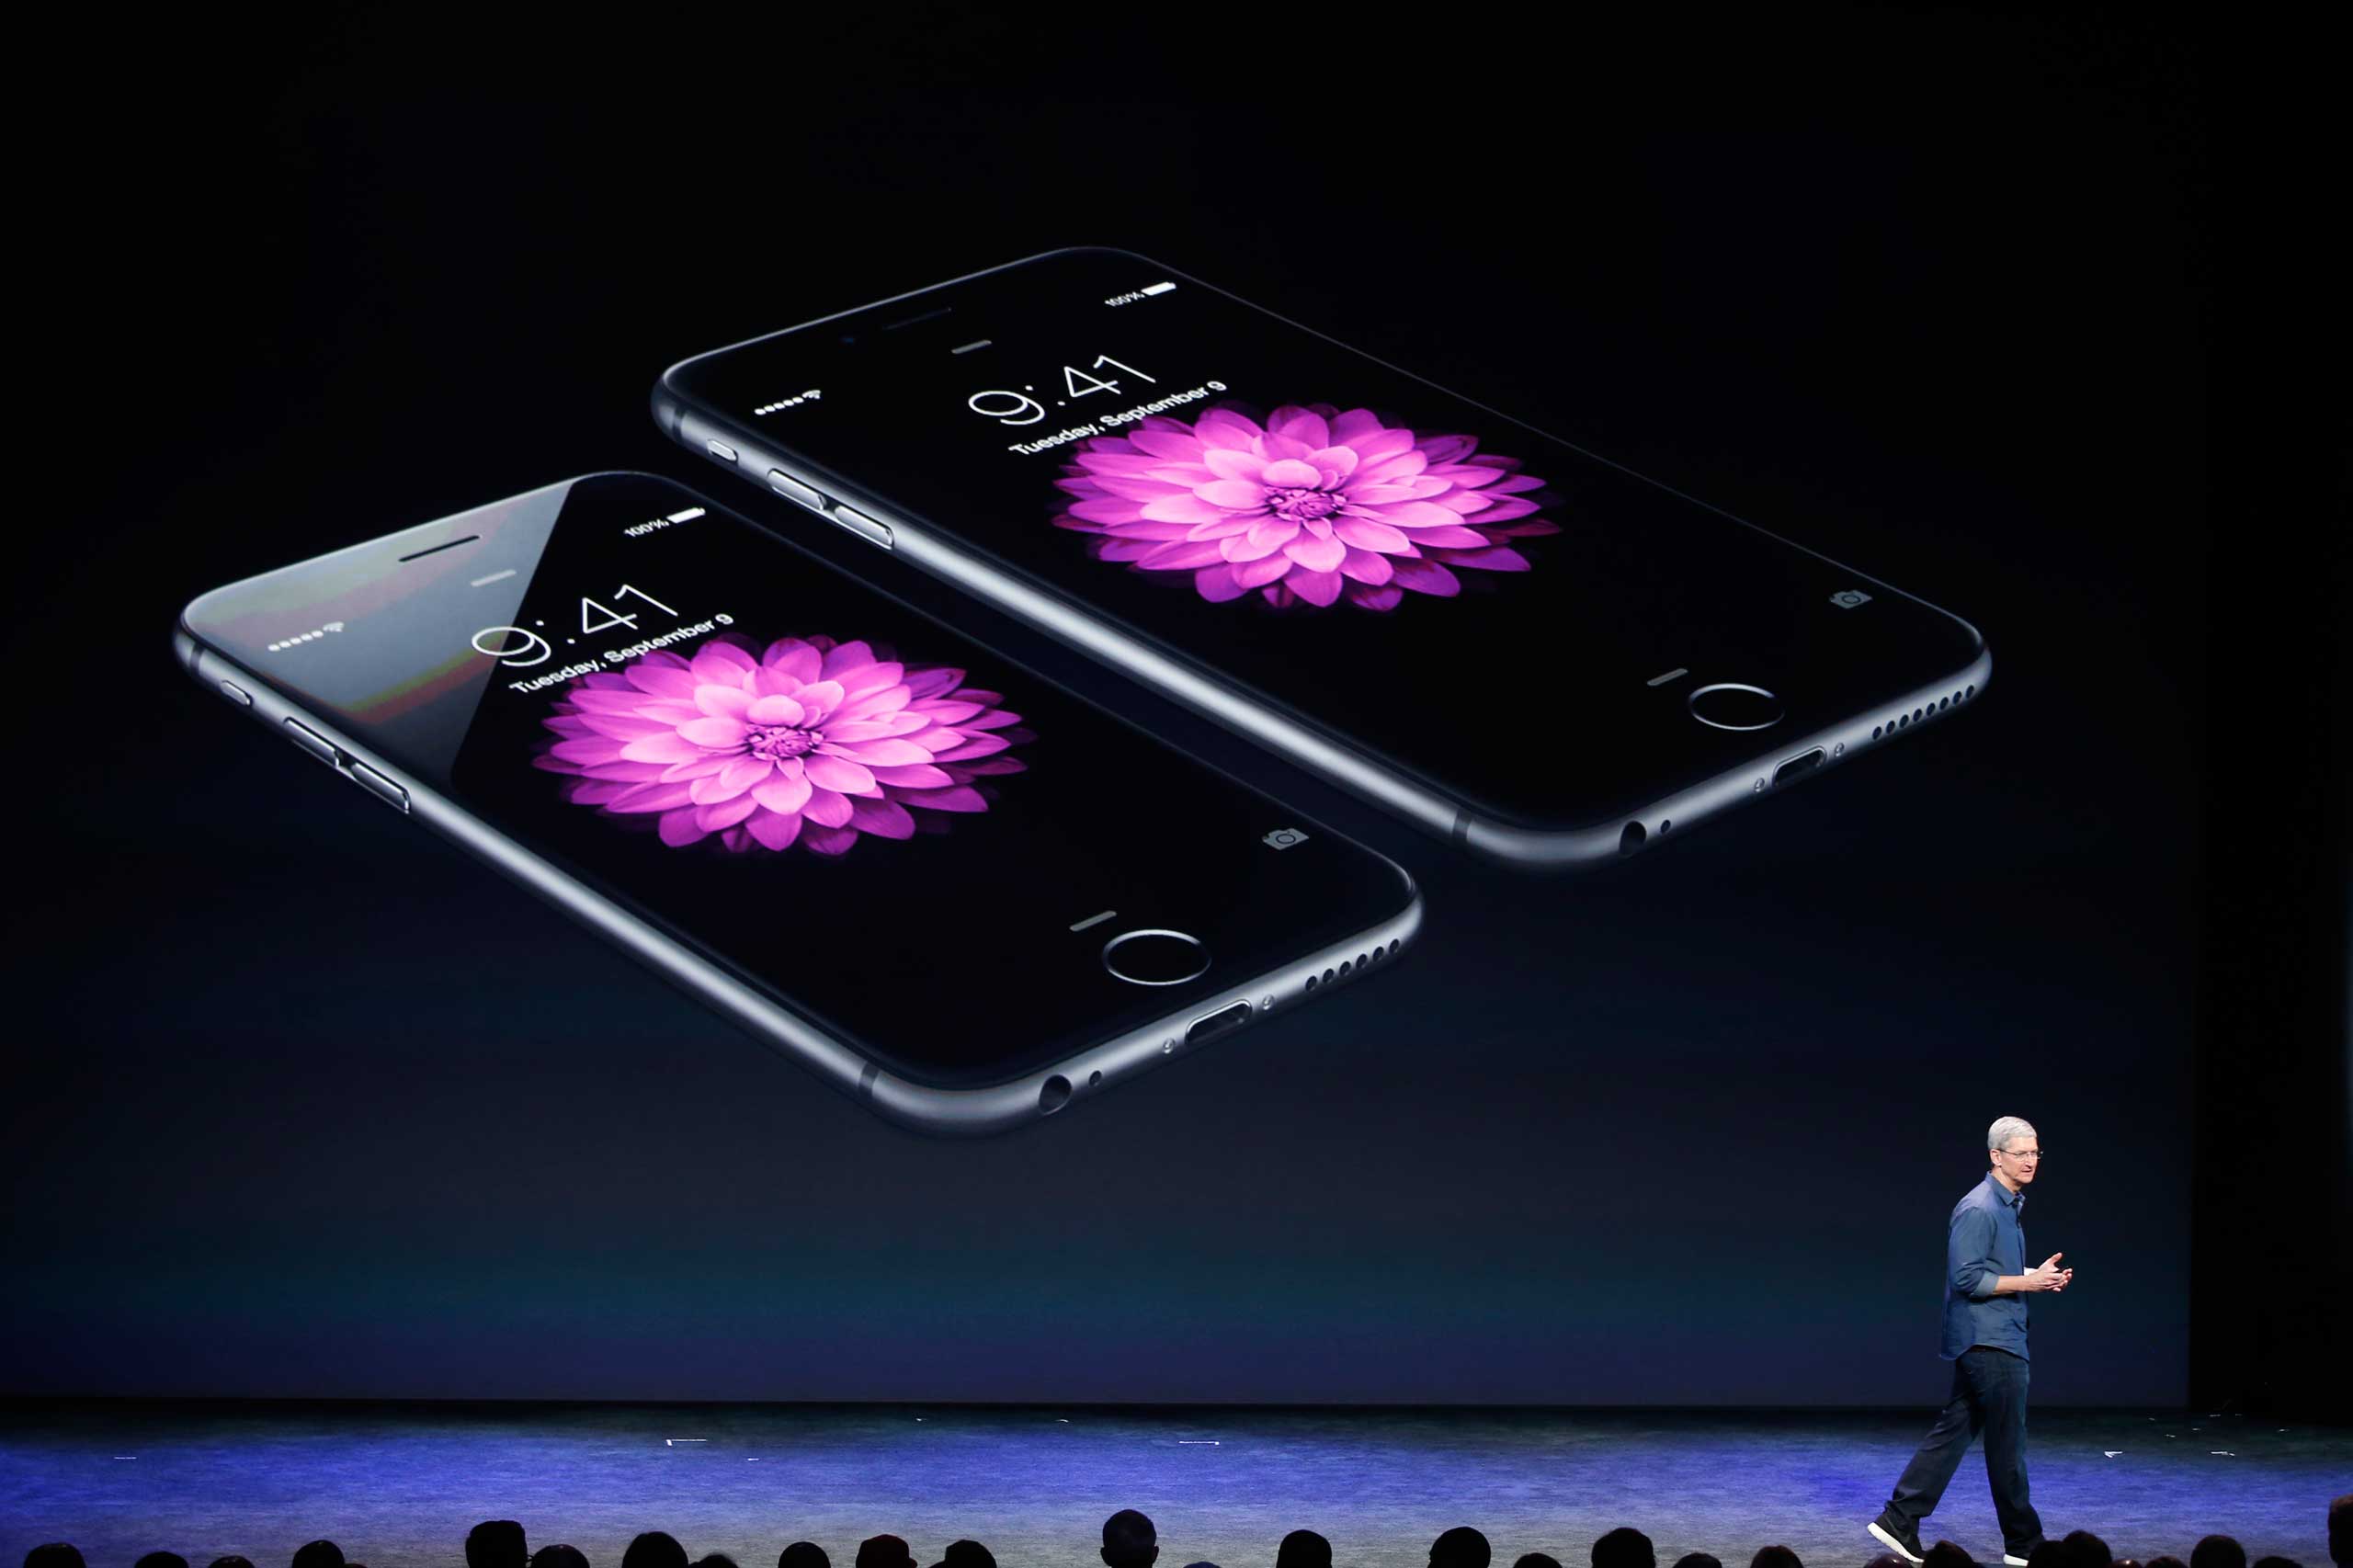 Apple CEO Tim Cook speaks during an Apple event announcing the iPhone 6 and the iPhone 6 Plus at the Flint Center in Cupertino, Calif., September 9, 2014.